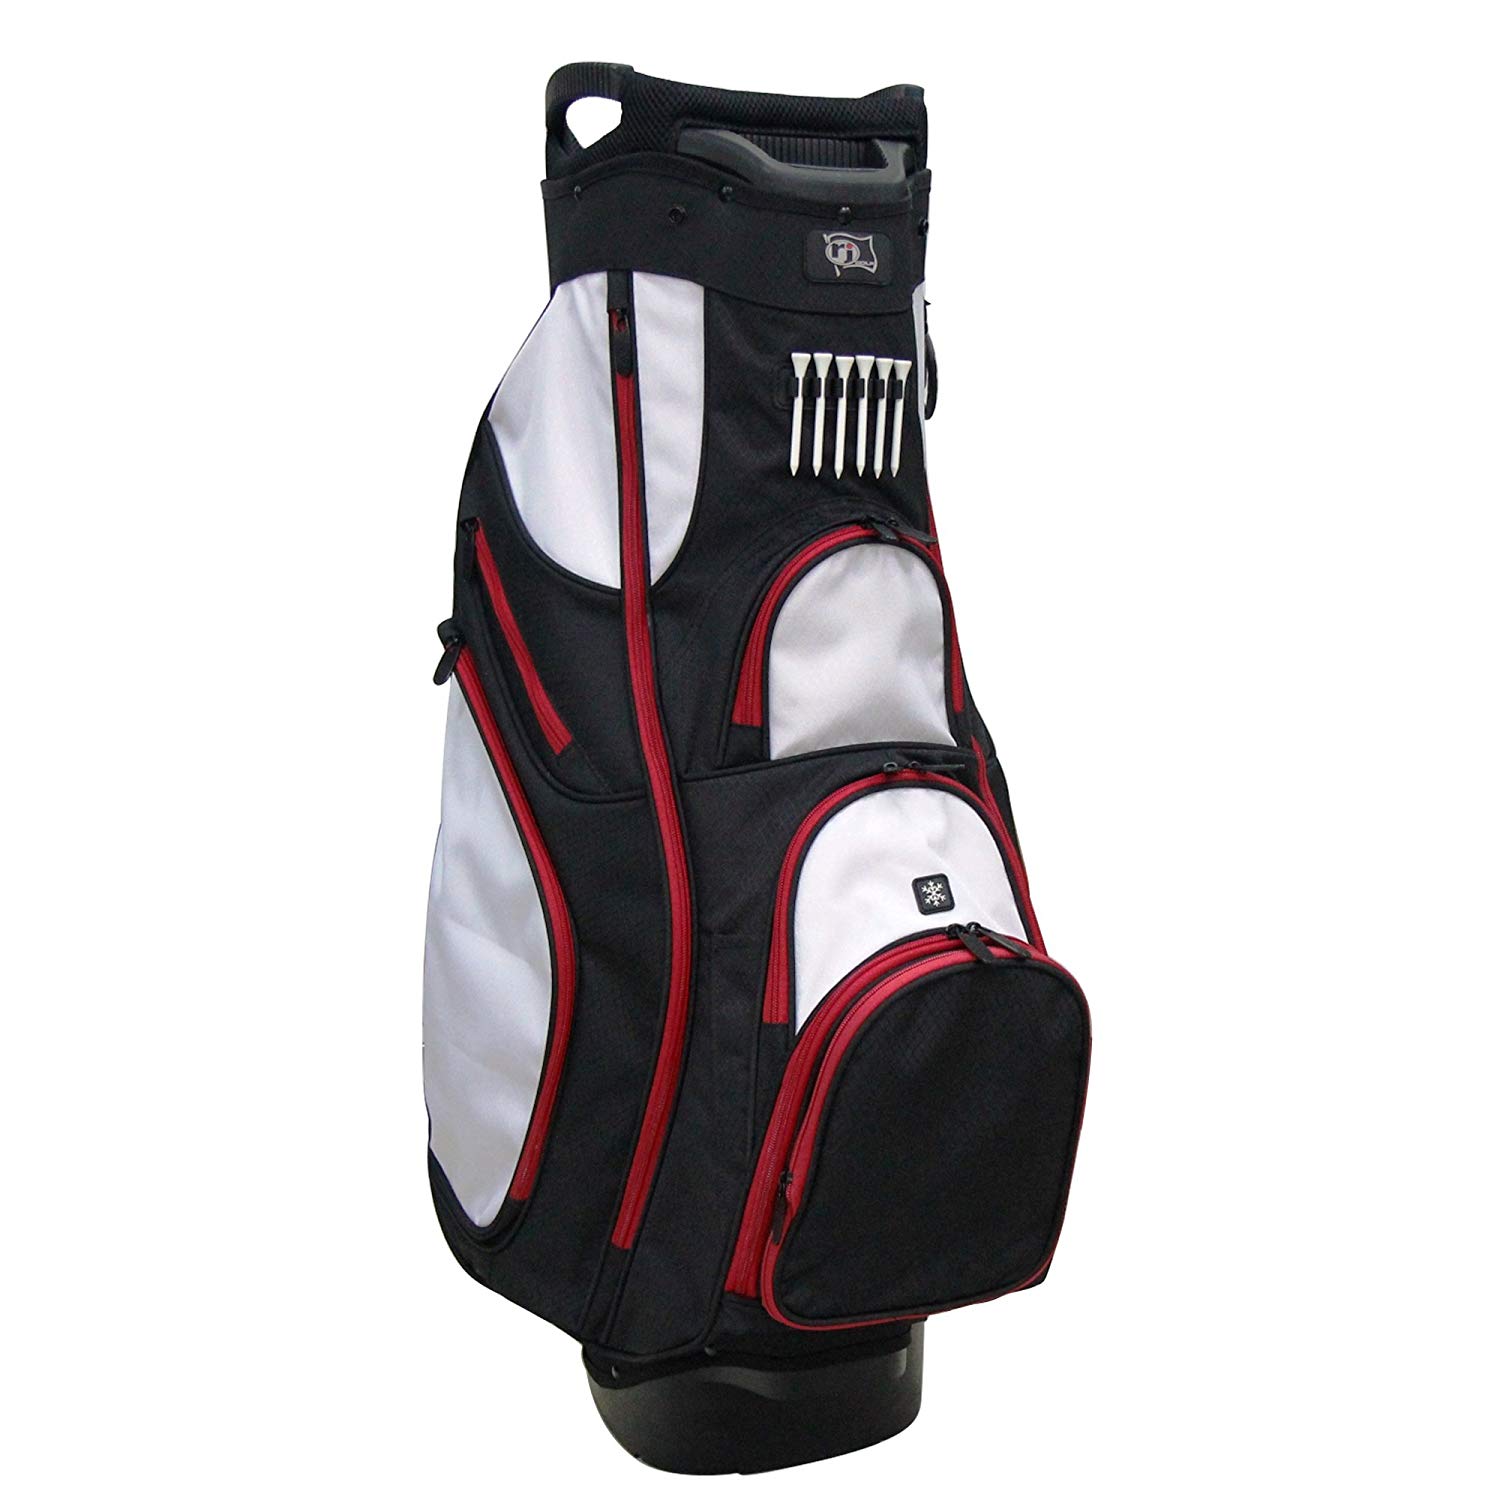 RJ Sports OX-820 Deluxe Golf Cart Bags